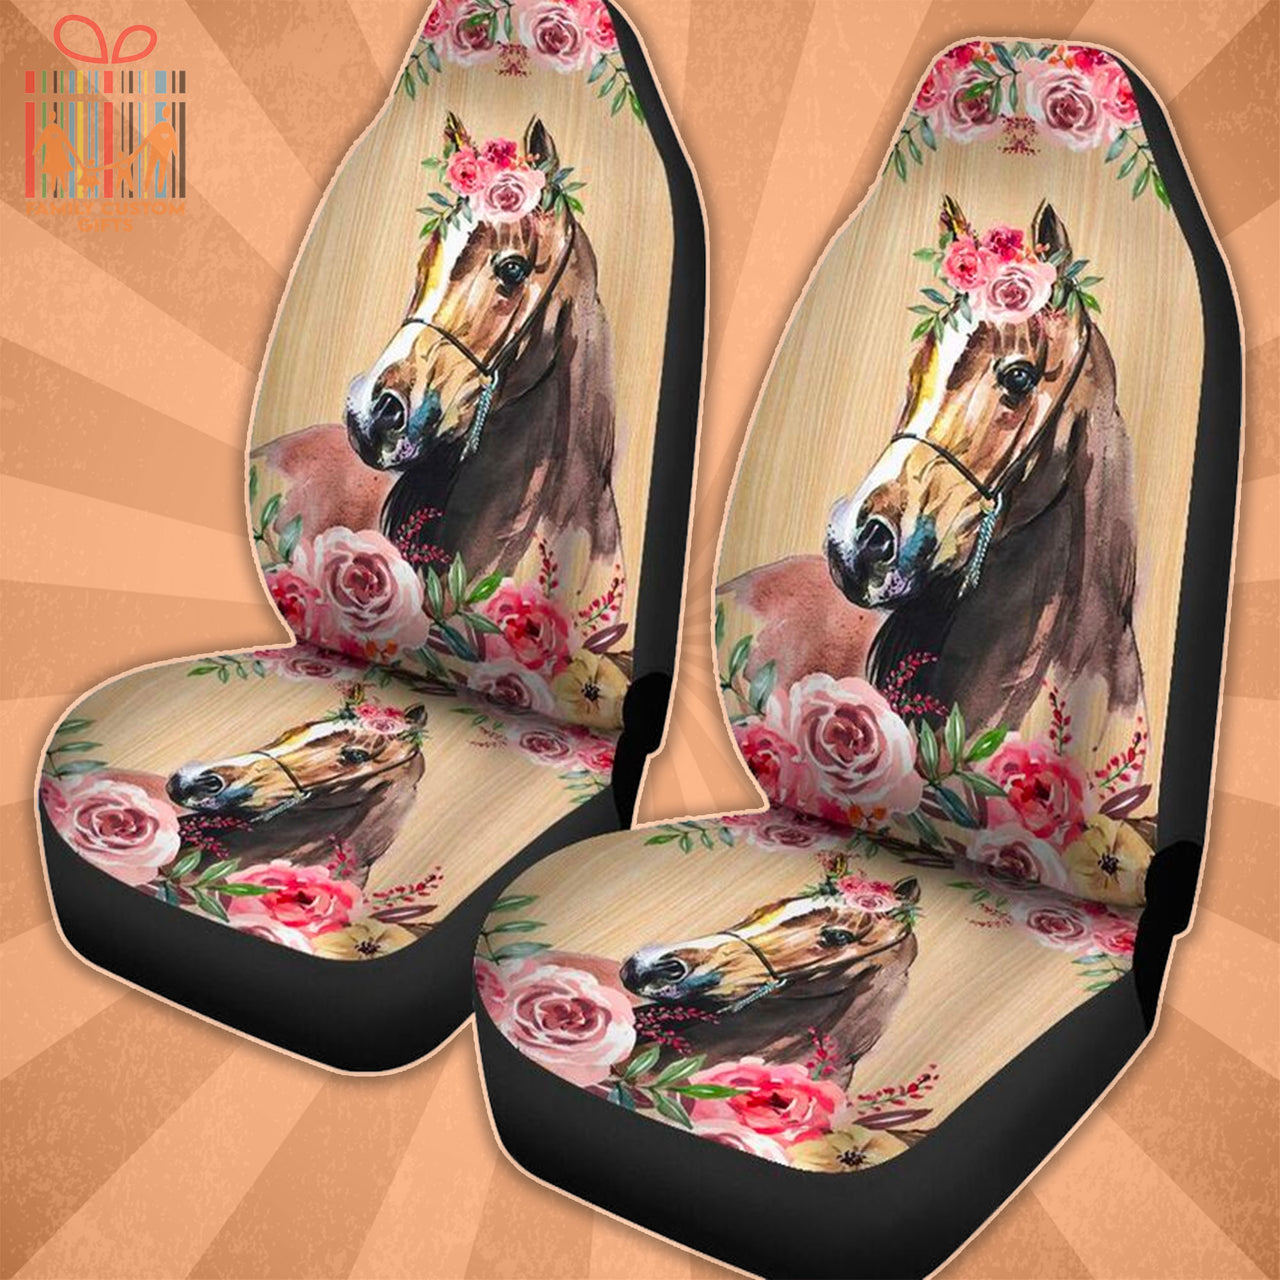 Custom Car Seat Cover Floral Horse Car Seat Cover Flowers Wood Seat Covers for Cars